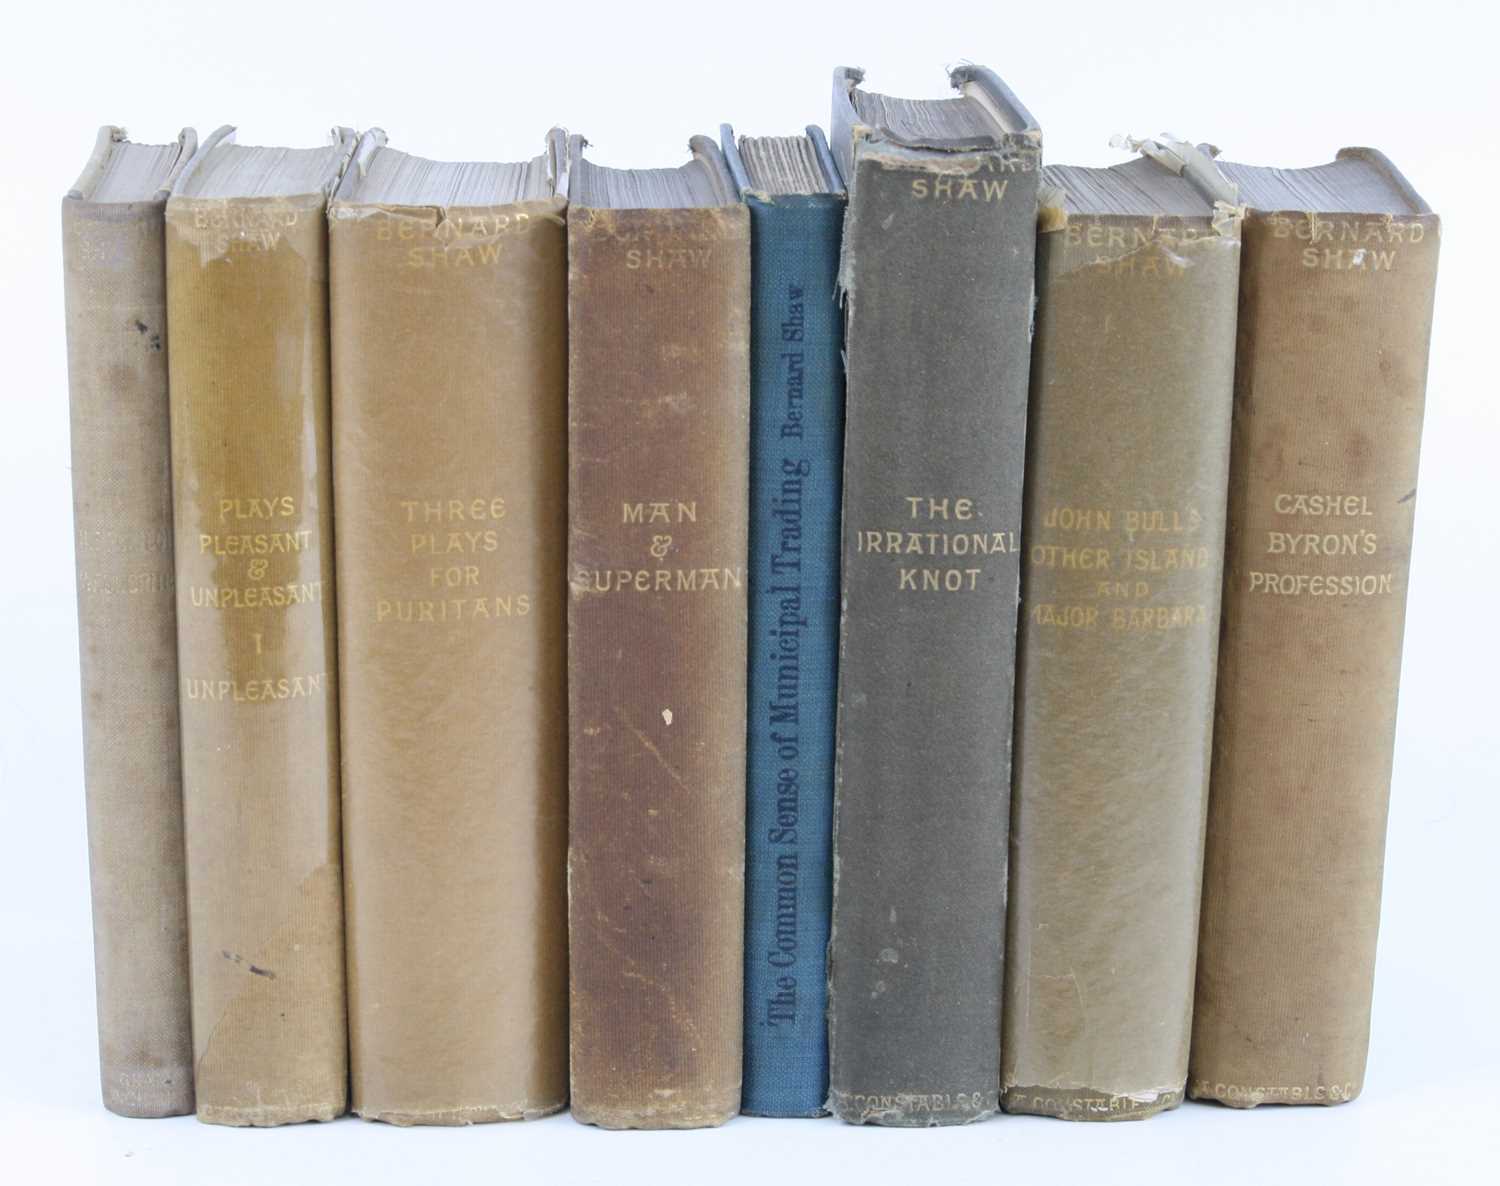 Shaw, George Bernard and related: a collection of volumes some first editions to include The - Image 3 of 4